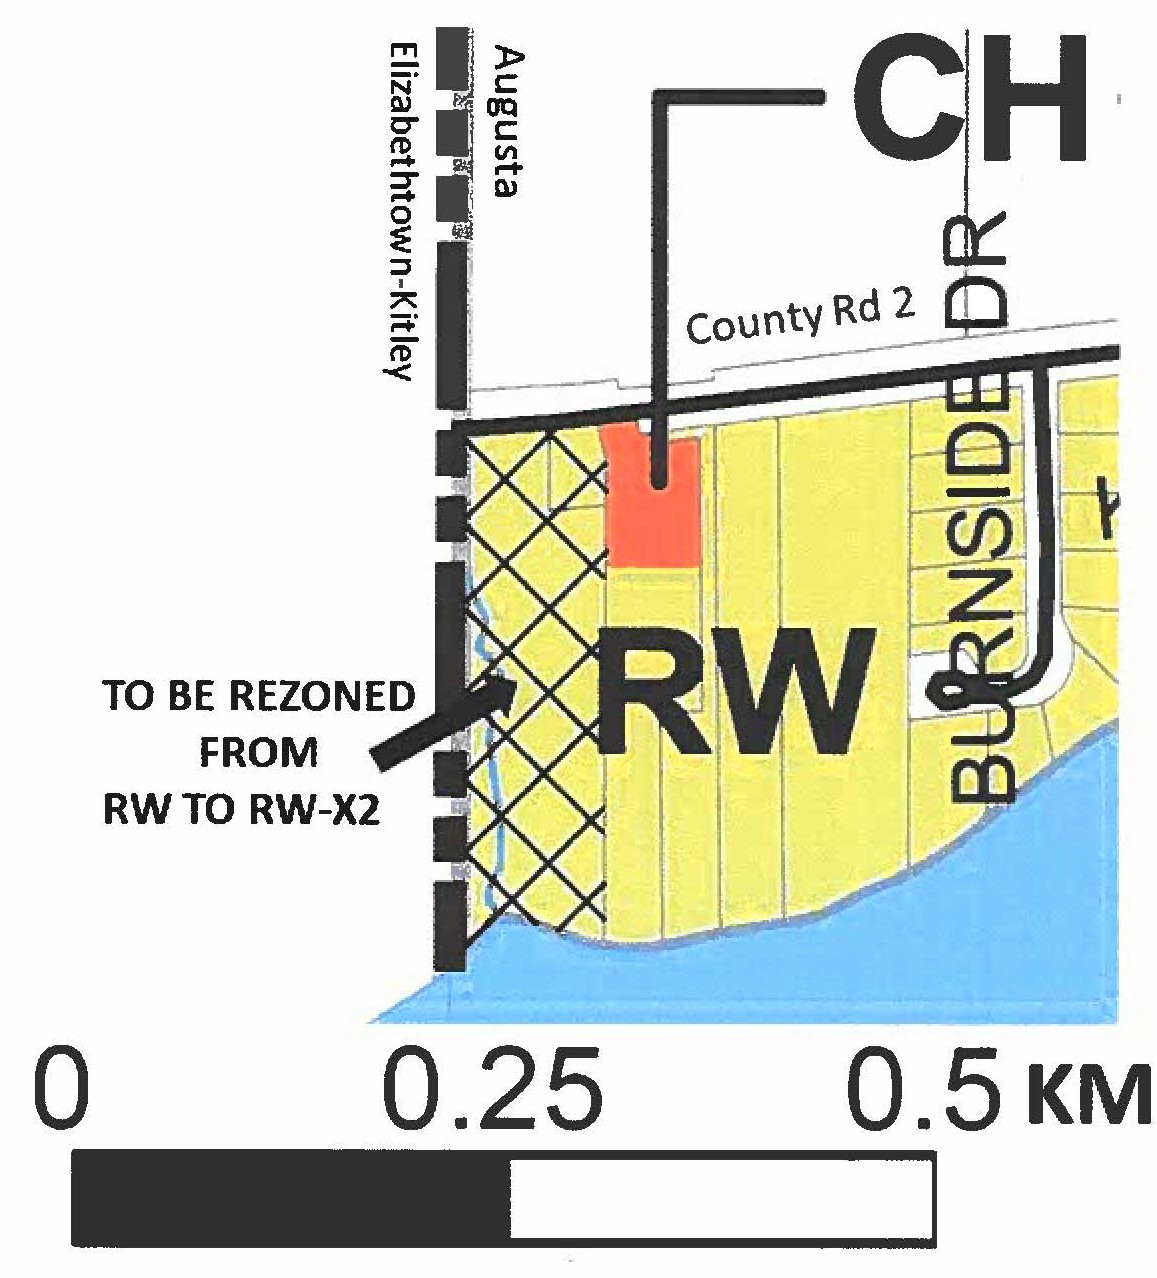 map showing the property being rezoned